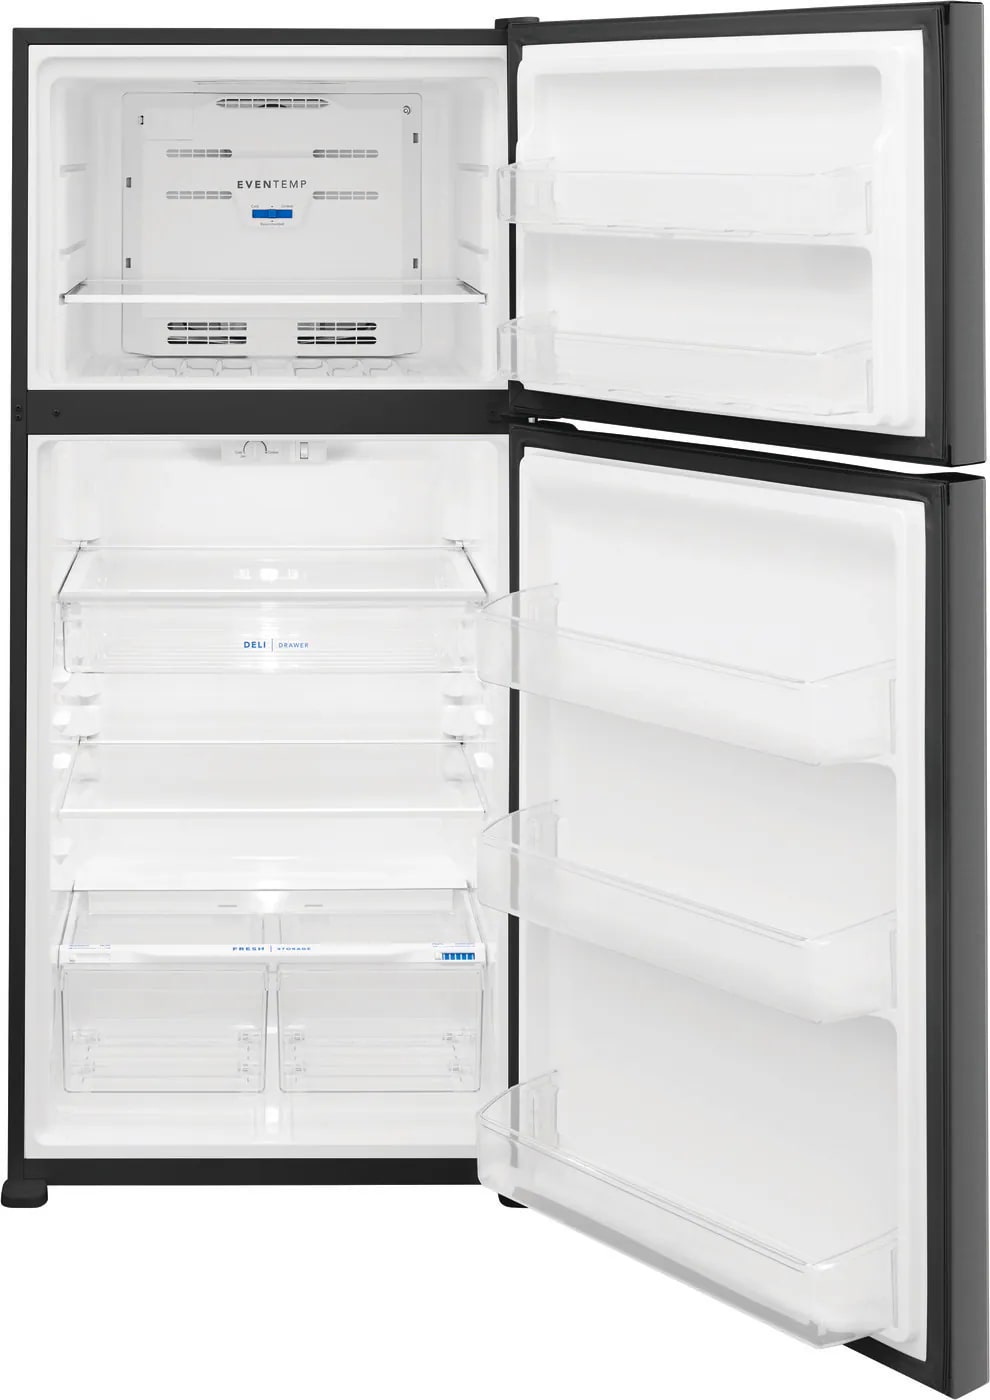 Frigidaire - 30 Inch 20 cu. ft Top Mount Refrigerator in Black Stainless - FFTR2045VD